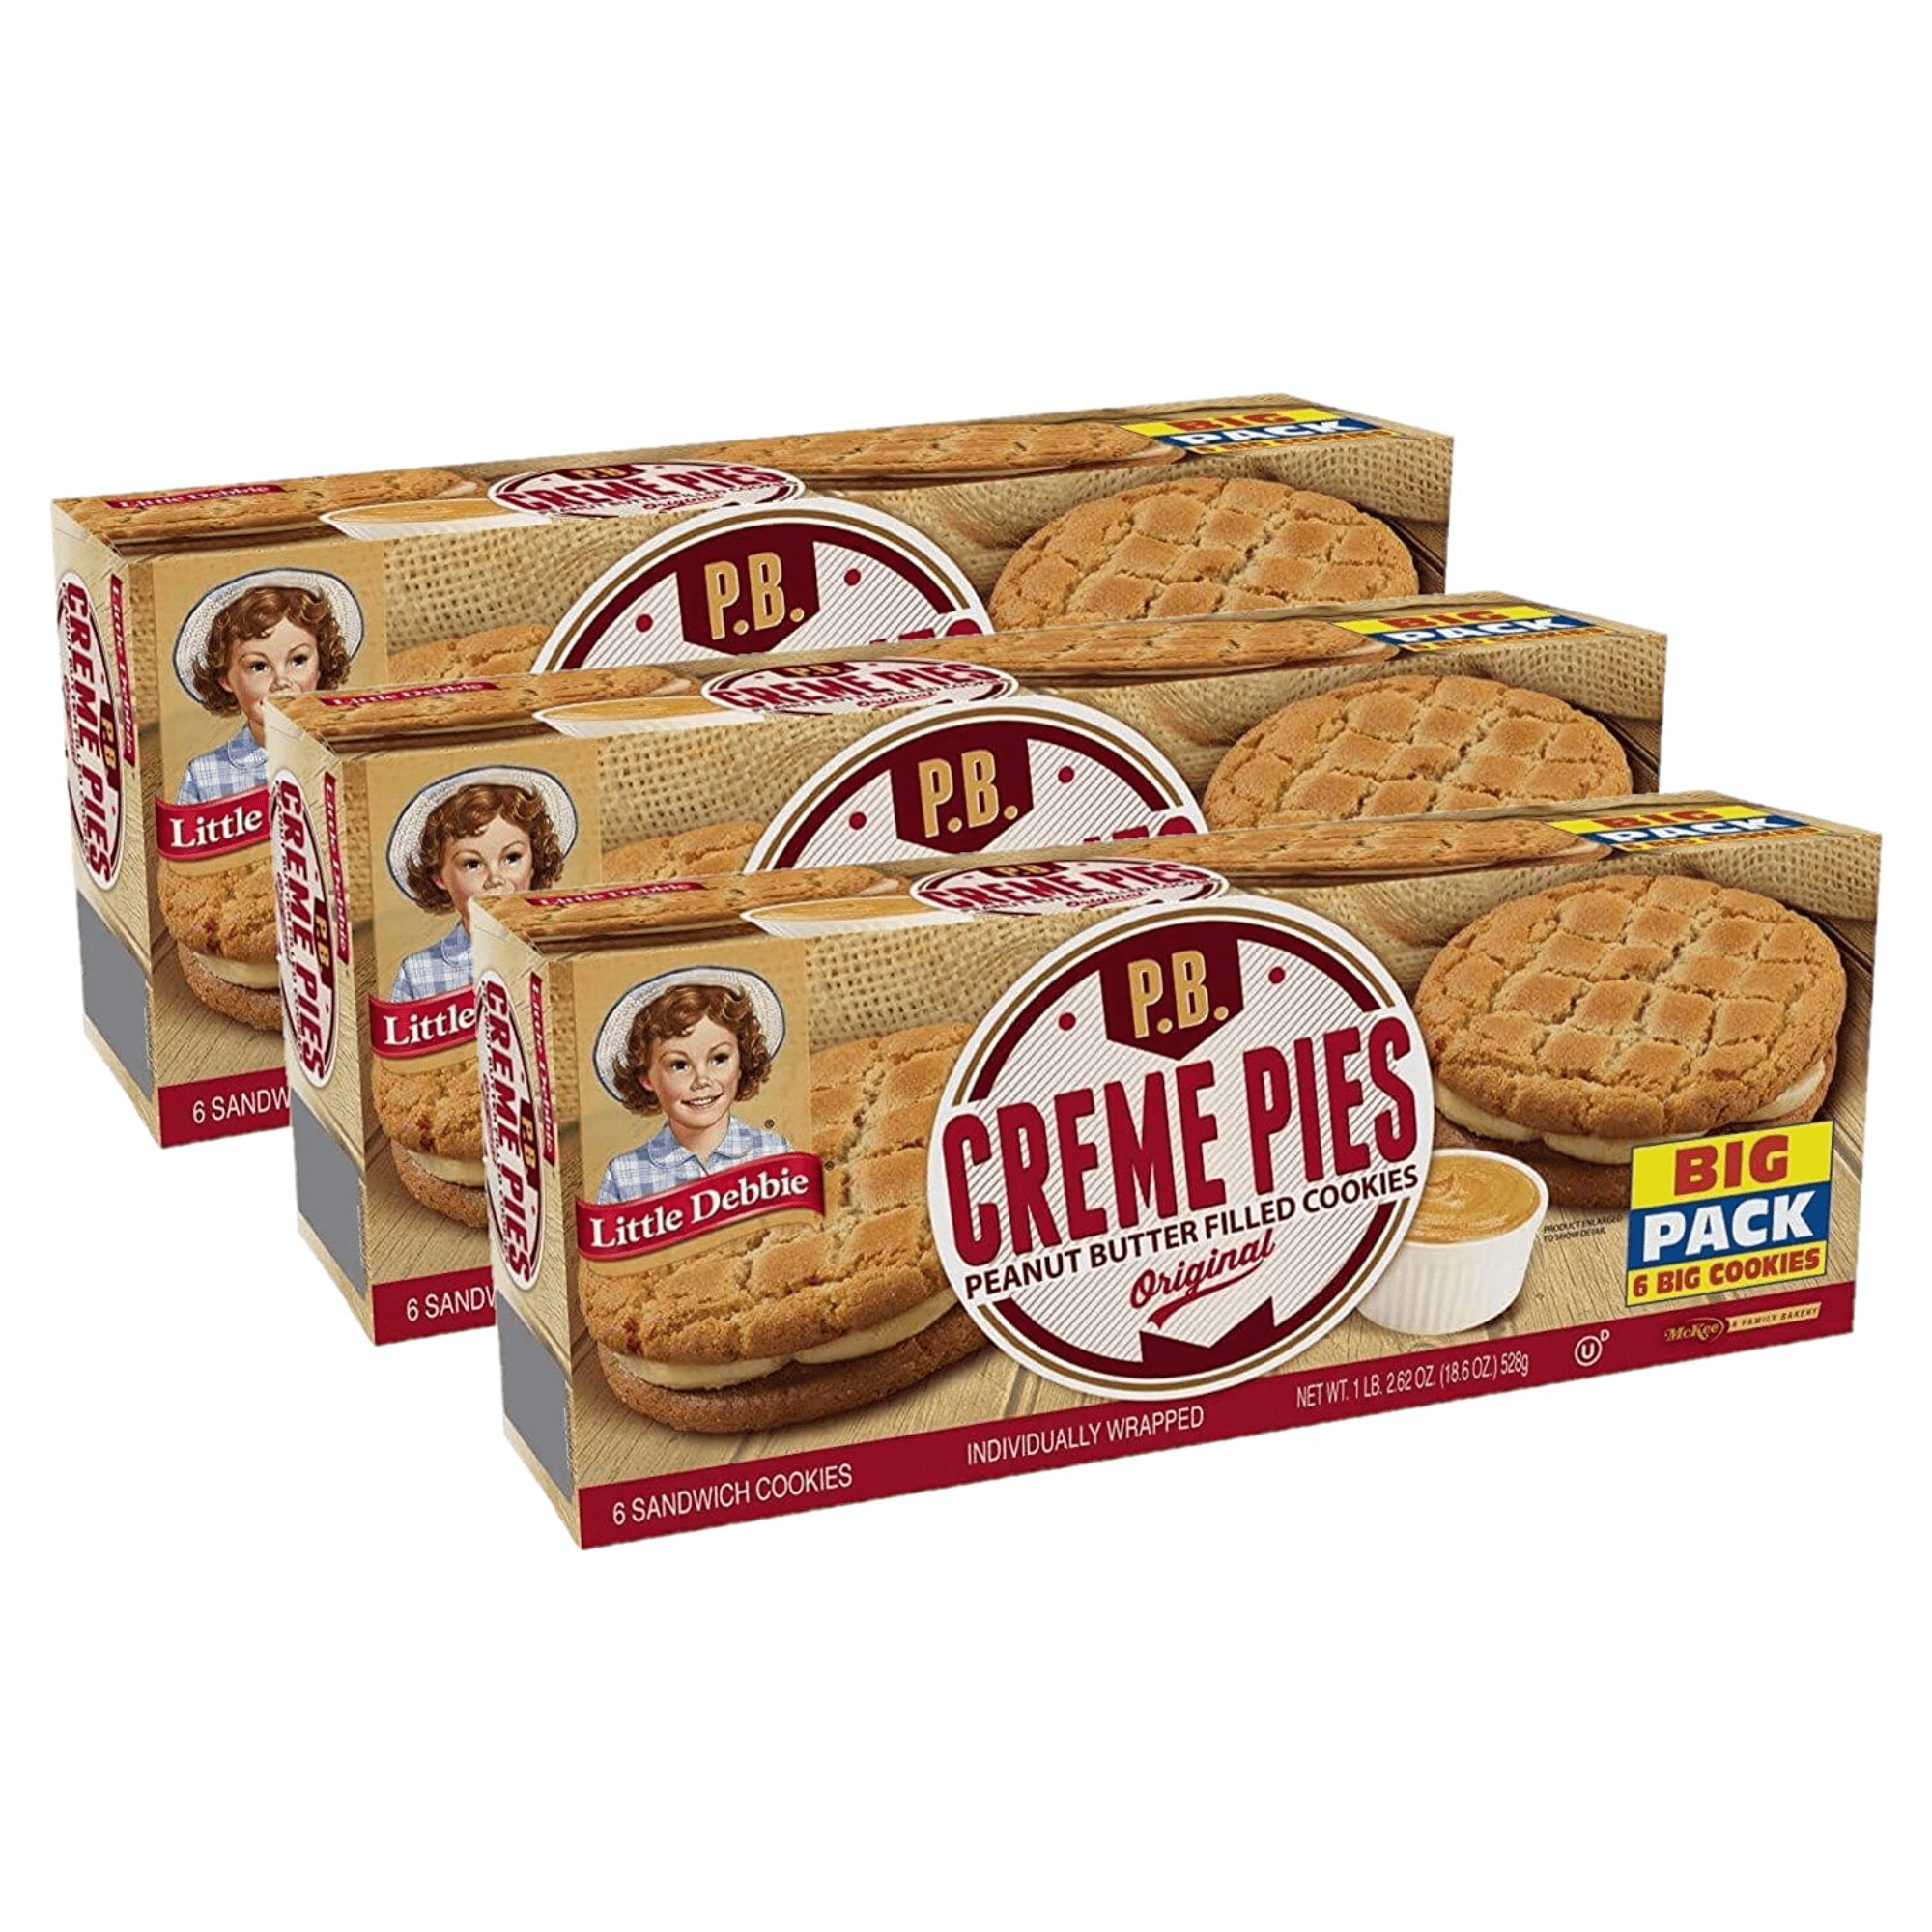 Little Debbie Peanut Butter Creme Pies, 9 Big Pack Boxes, 54 Individually Wrapped Sandwich Cookies picture